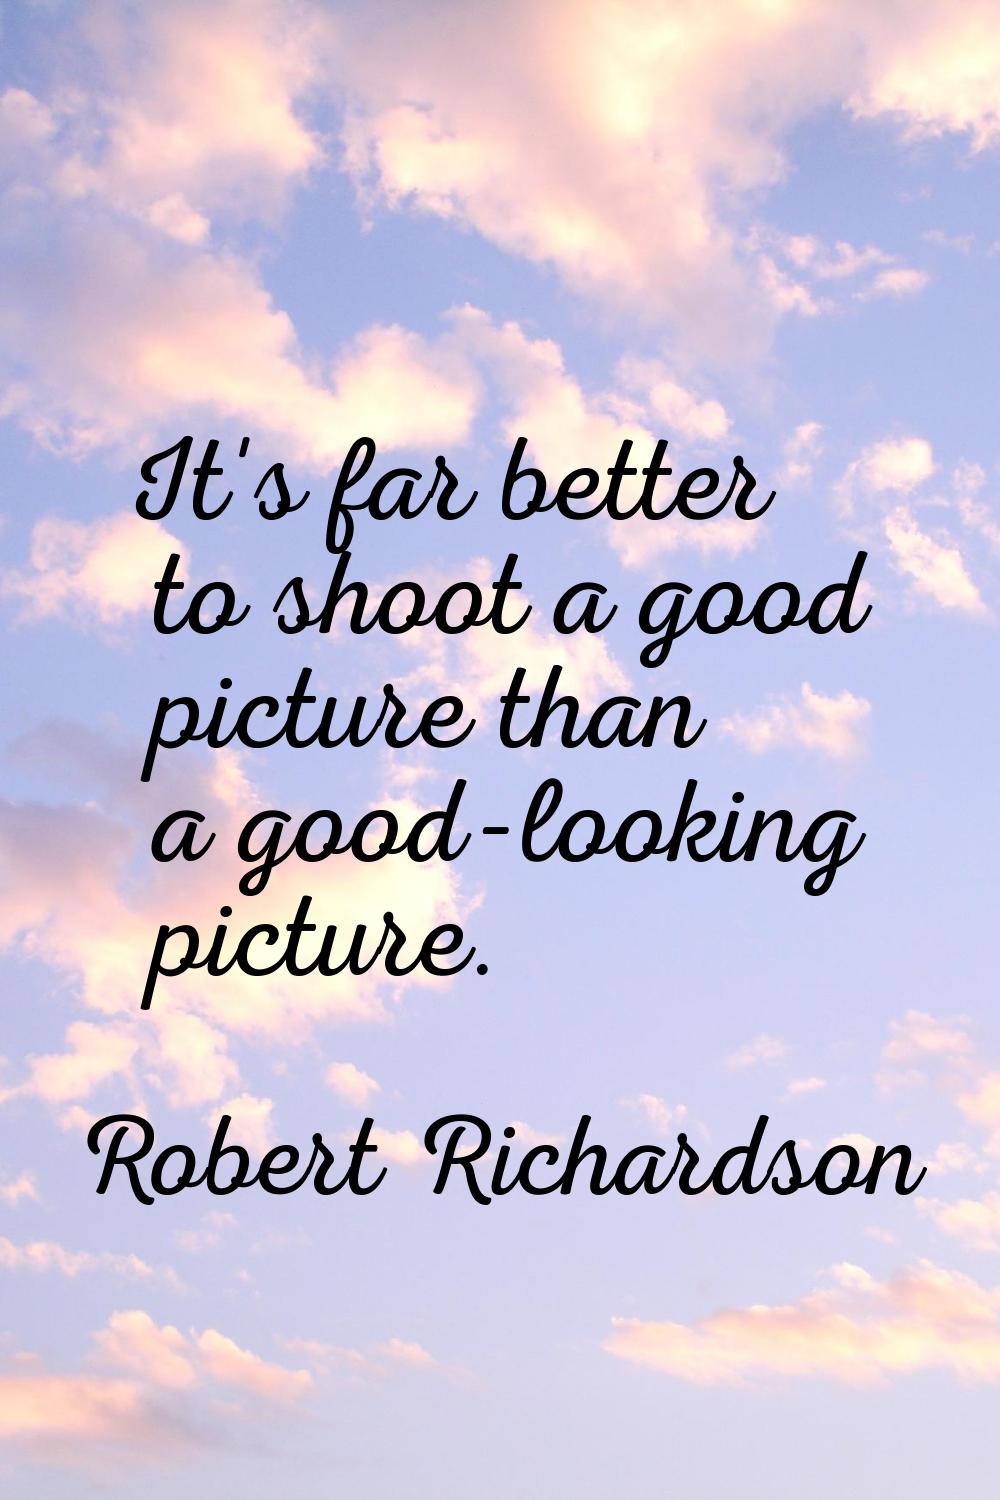 It's far better to shoot a good picture than a good-looking picture.